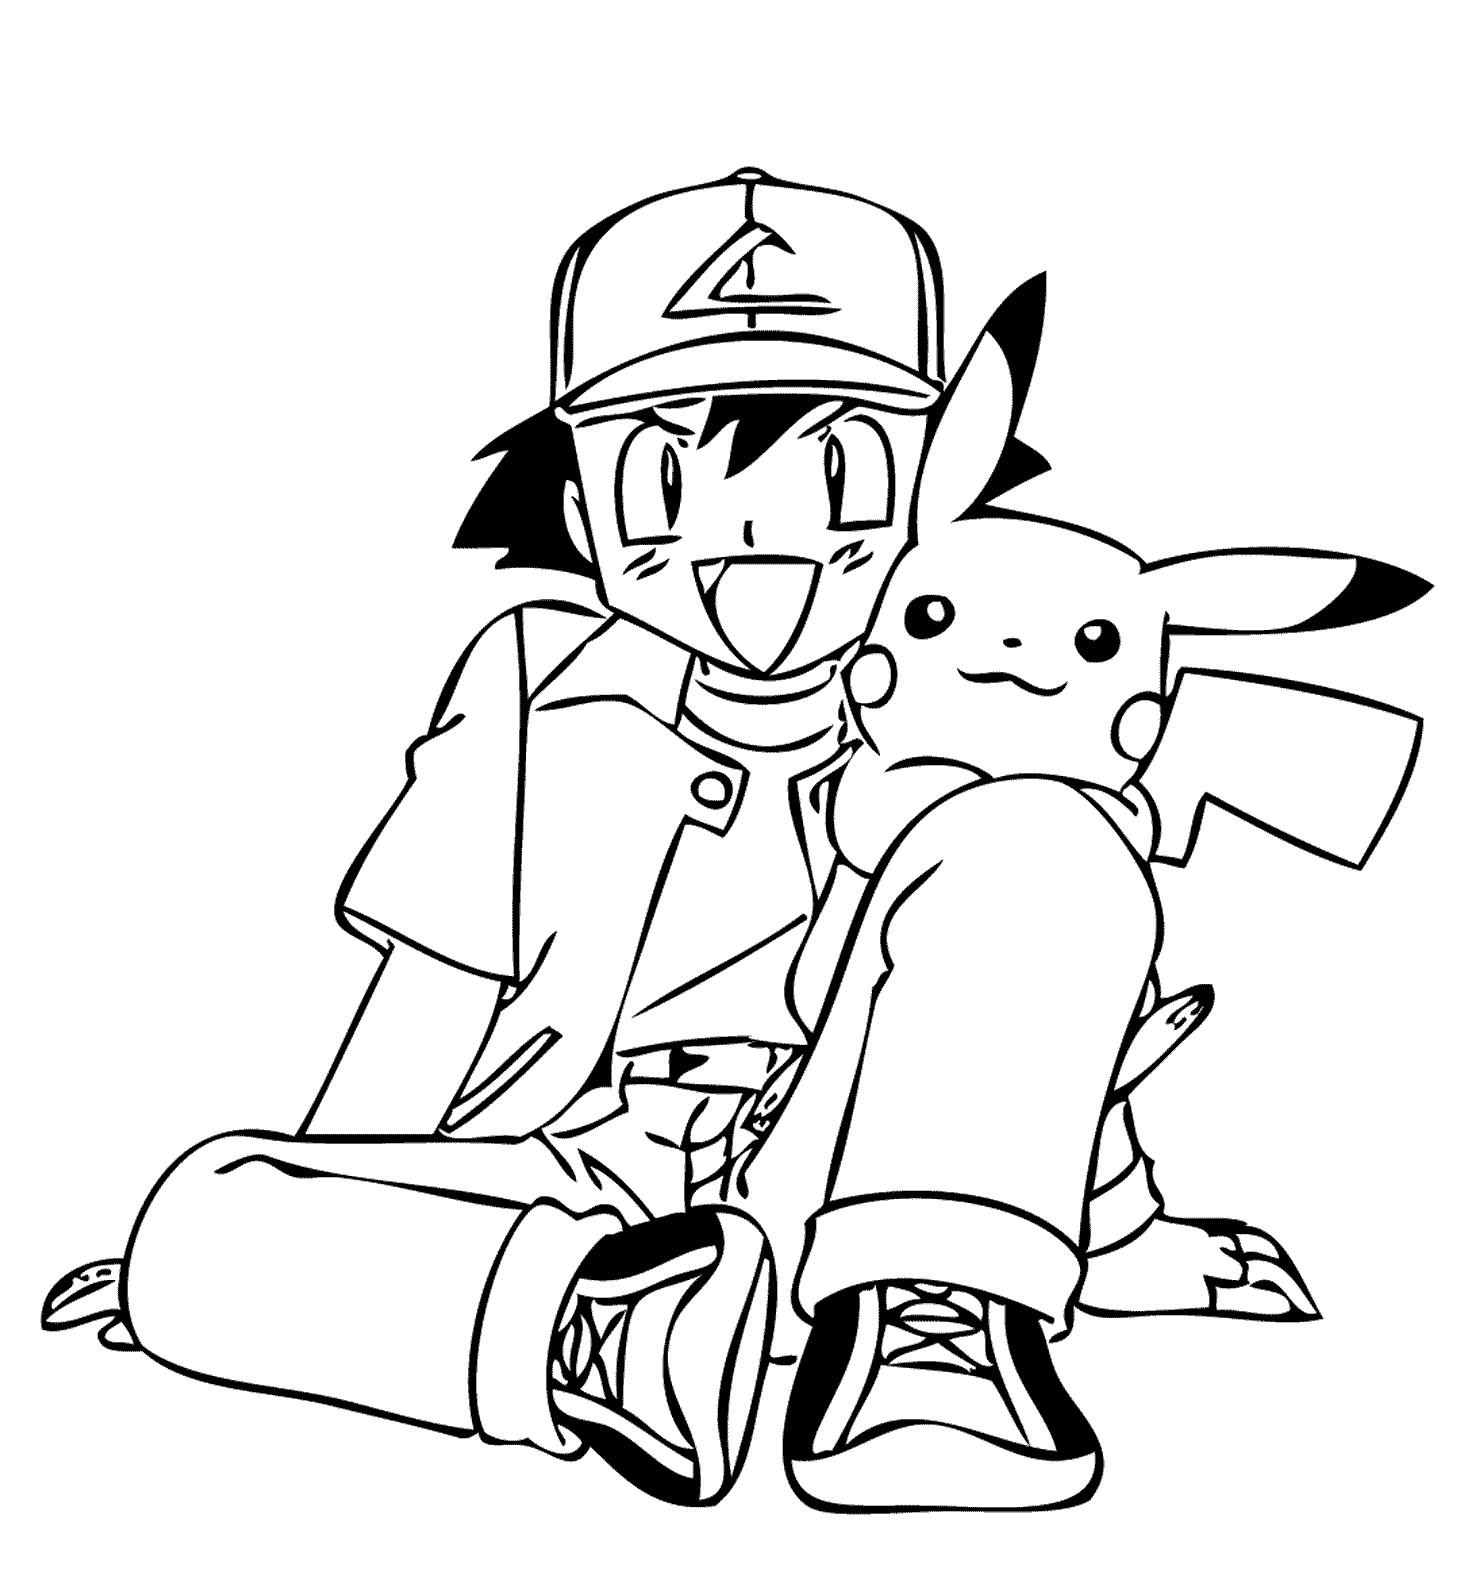 Coloring Sheets For Boys Pokemon
 Friends from Pokemon anime coloring pages for kids